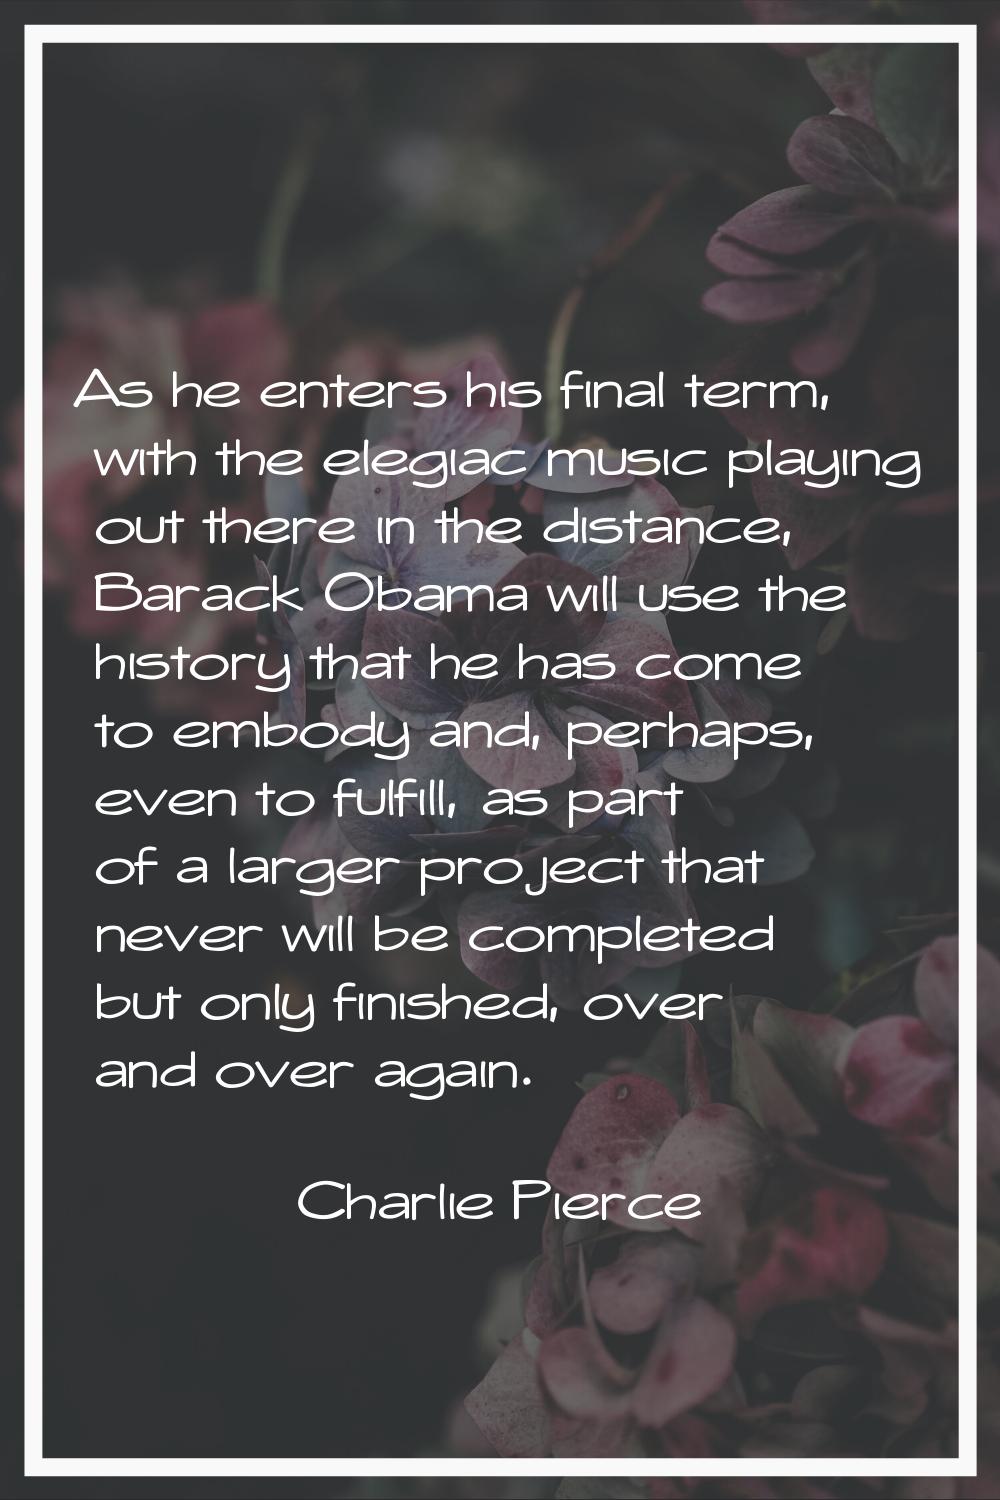 As he enters his final term, with the elegiac music playing out there in the distance, Barack Obama